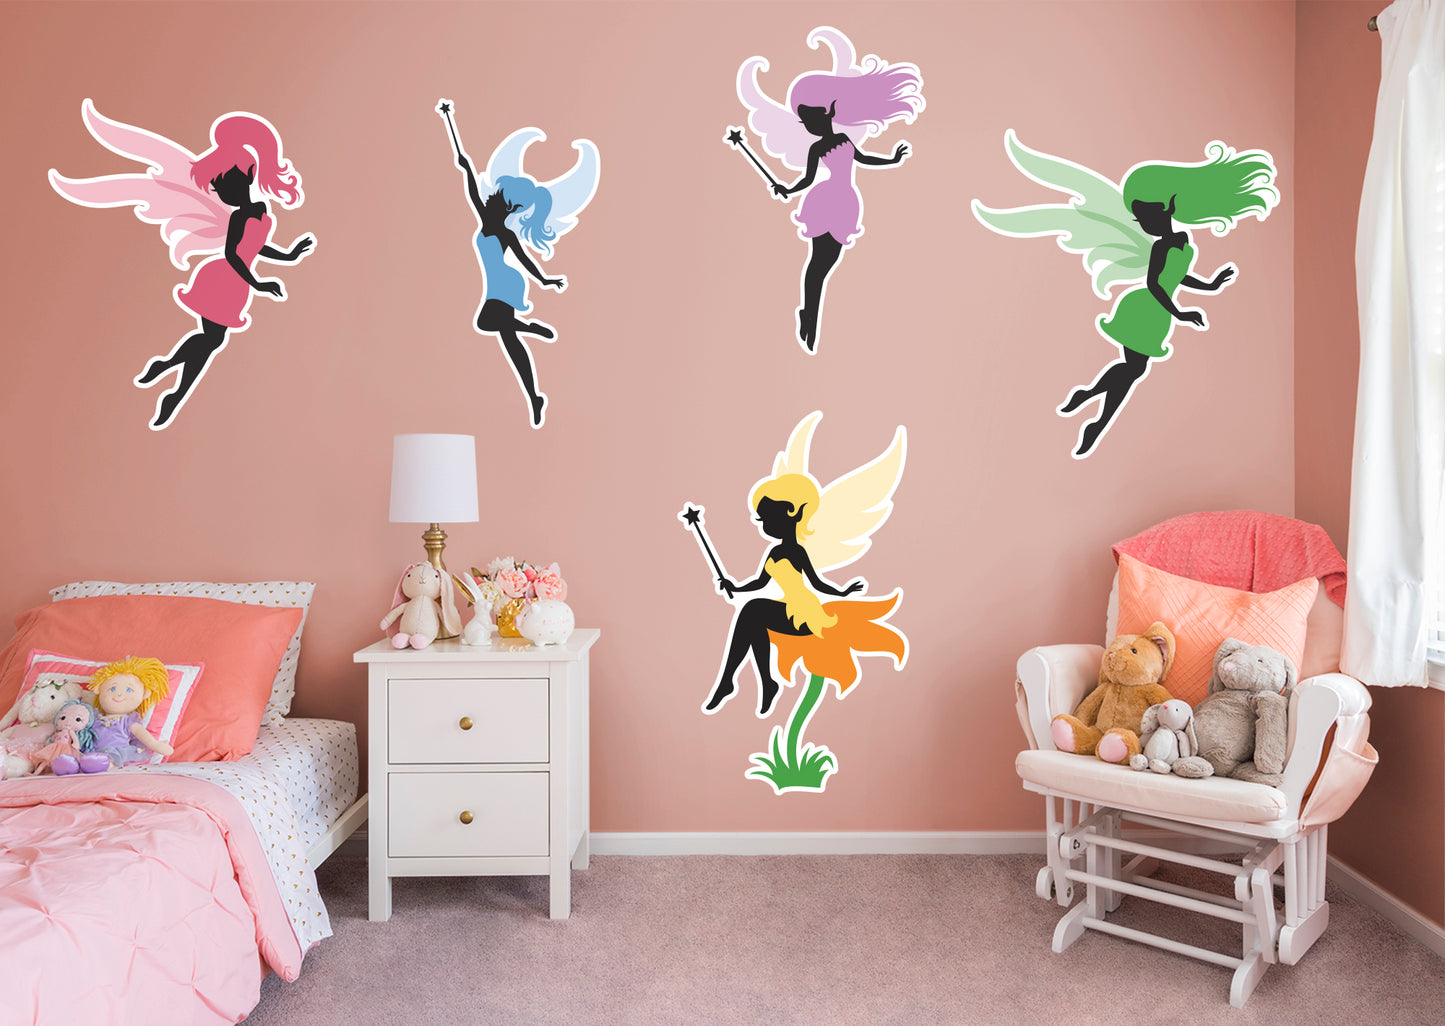 Nursery:  Five Fairies Collection        -   Removable Wall   Adhesive Decal